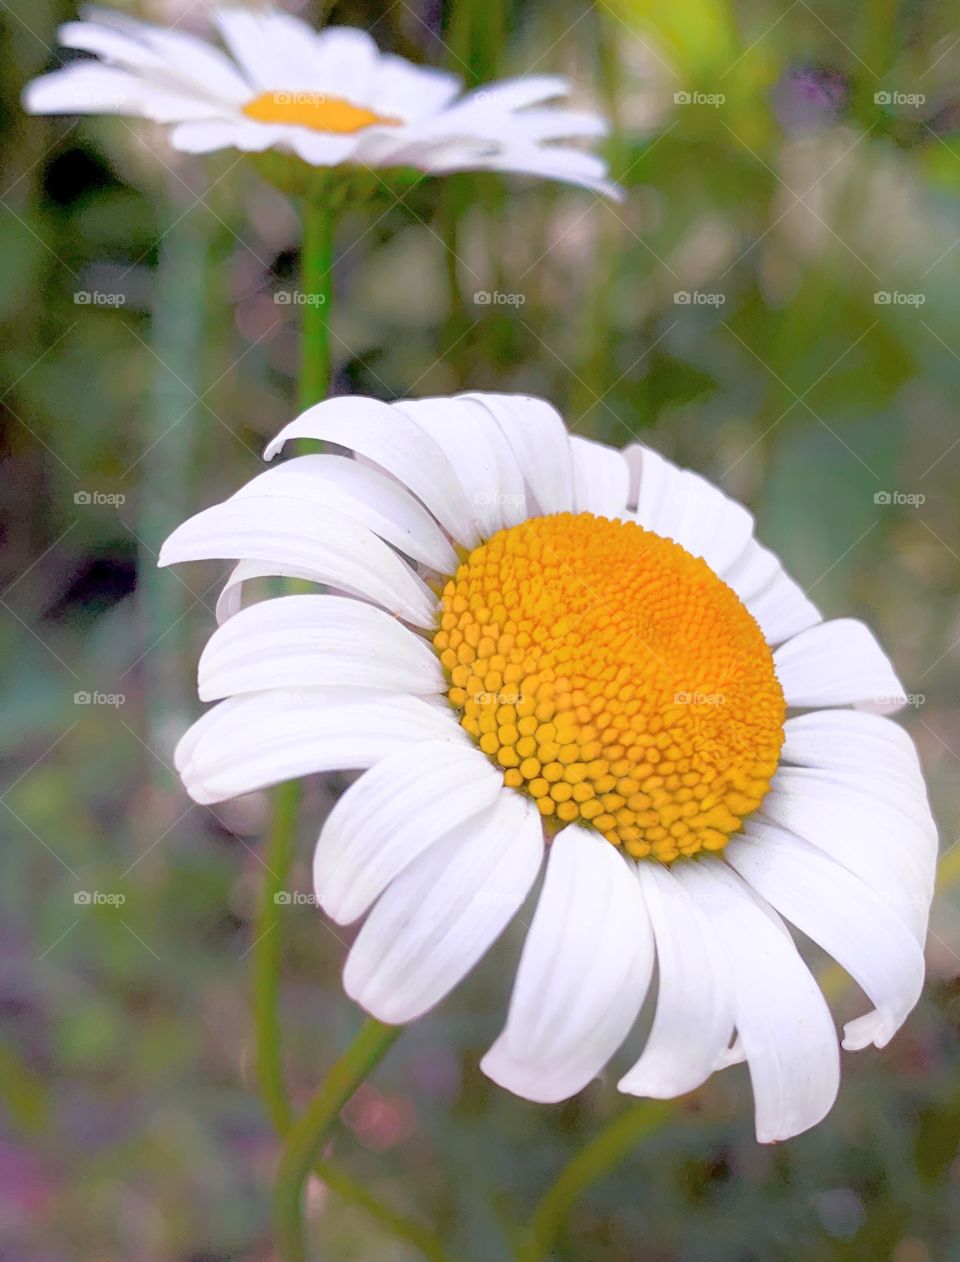 Close-up of a daisy in nature with another daisy in the background.